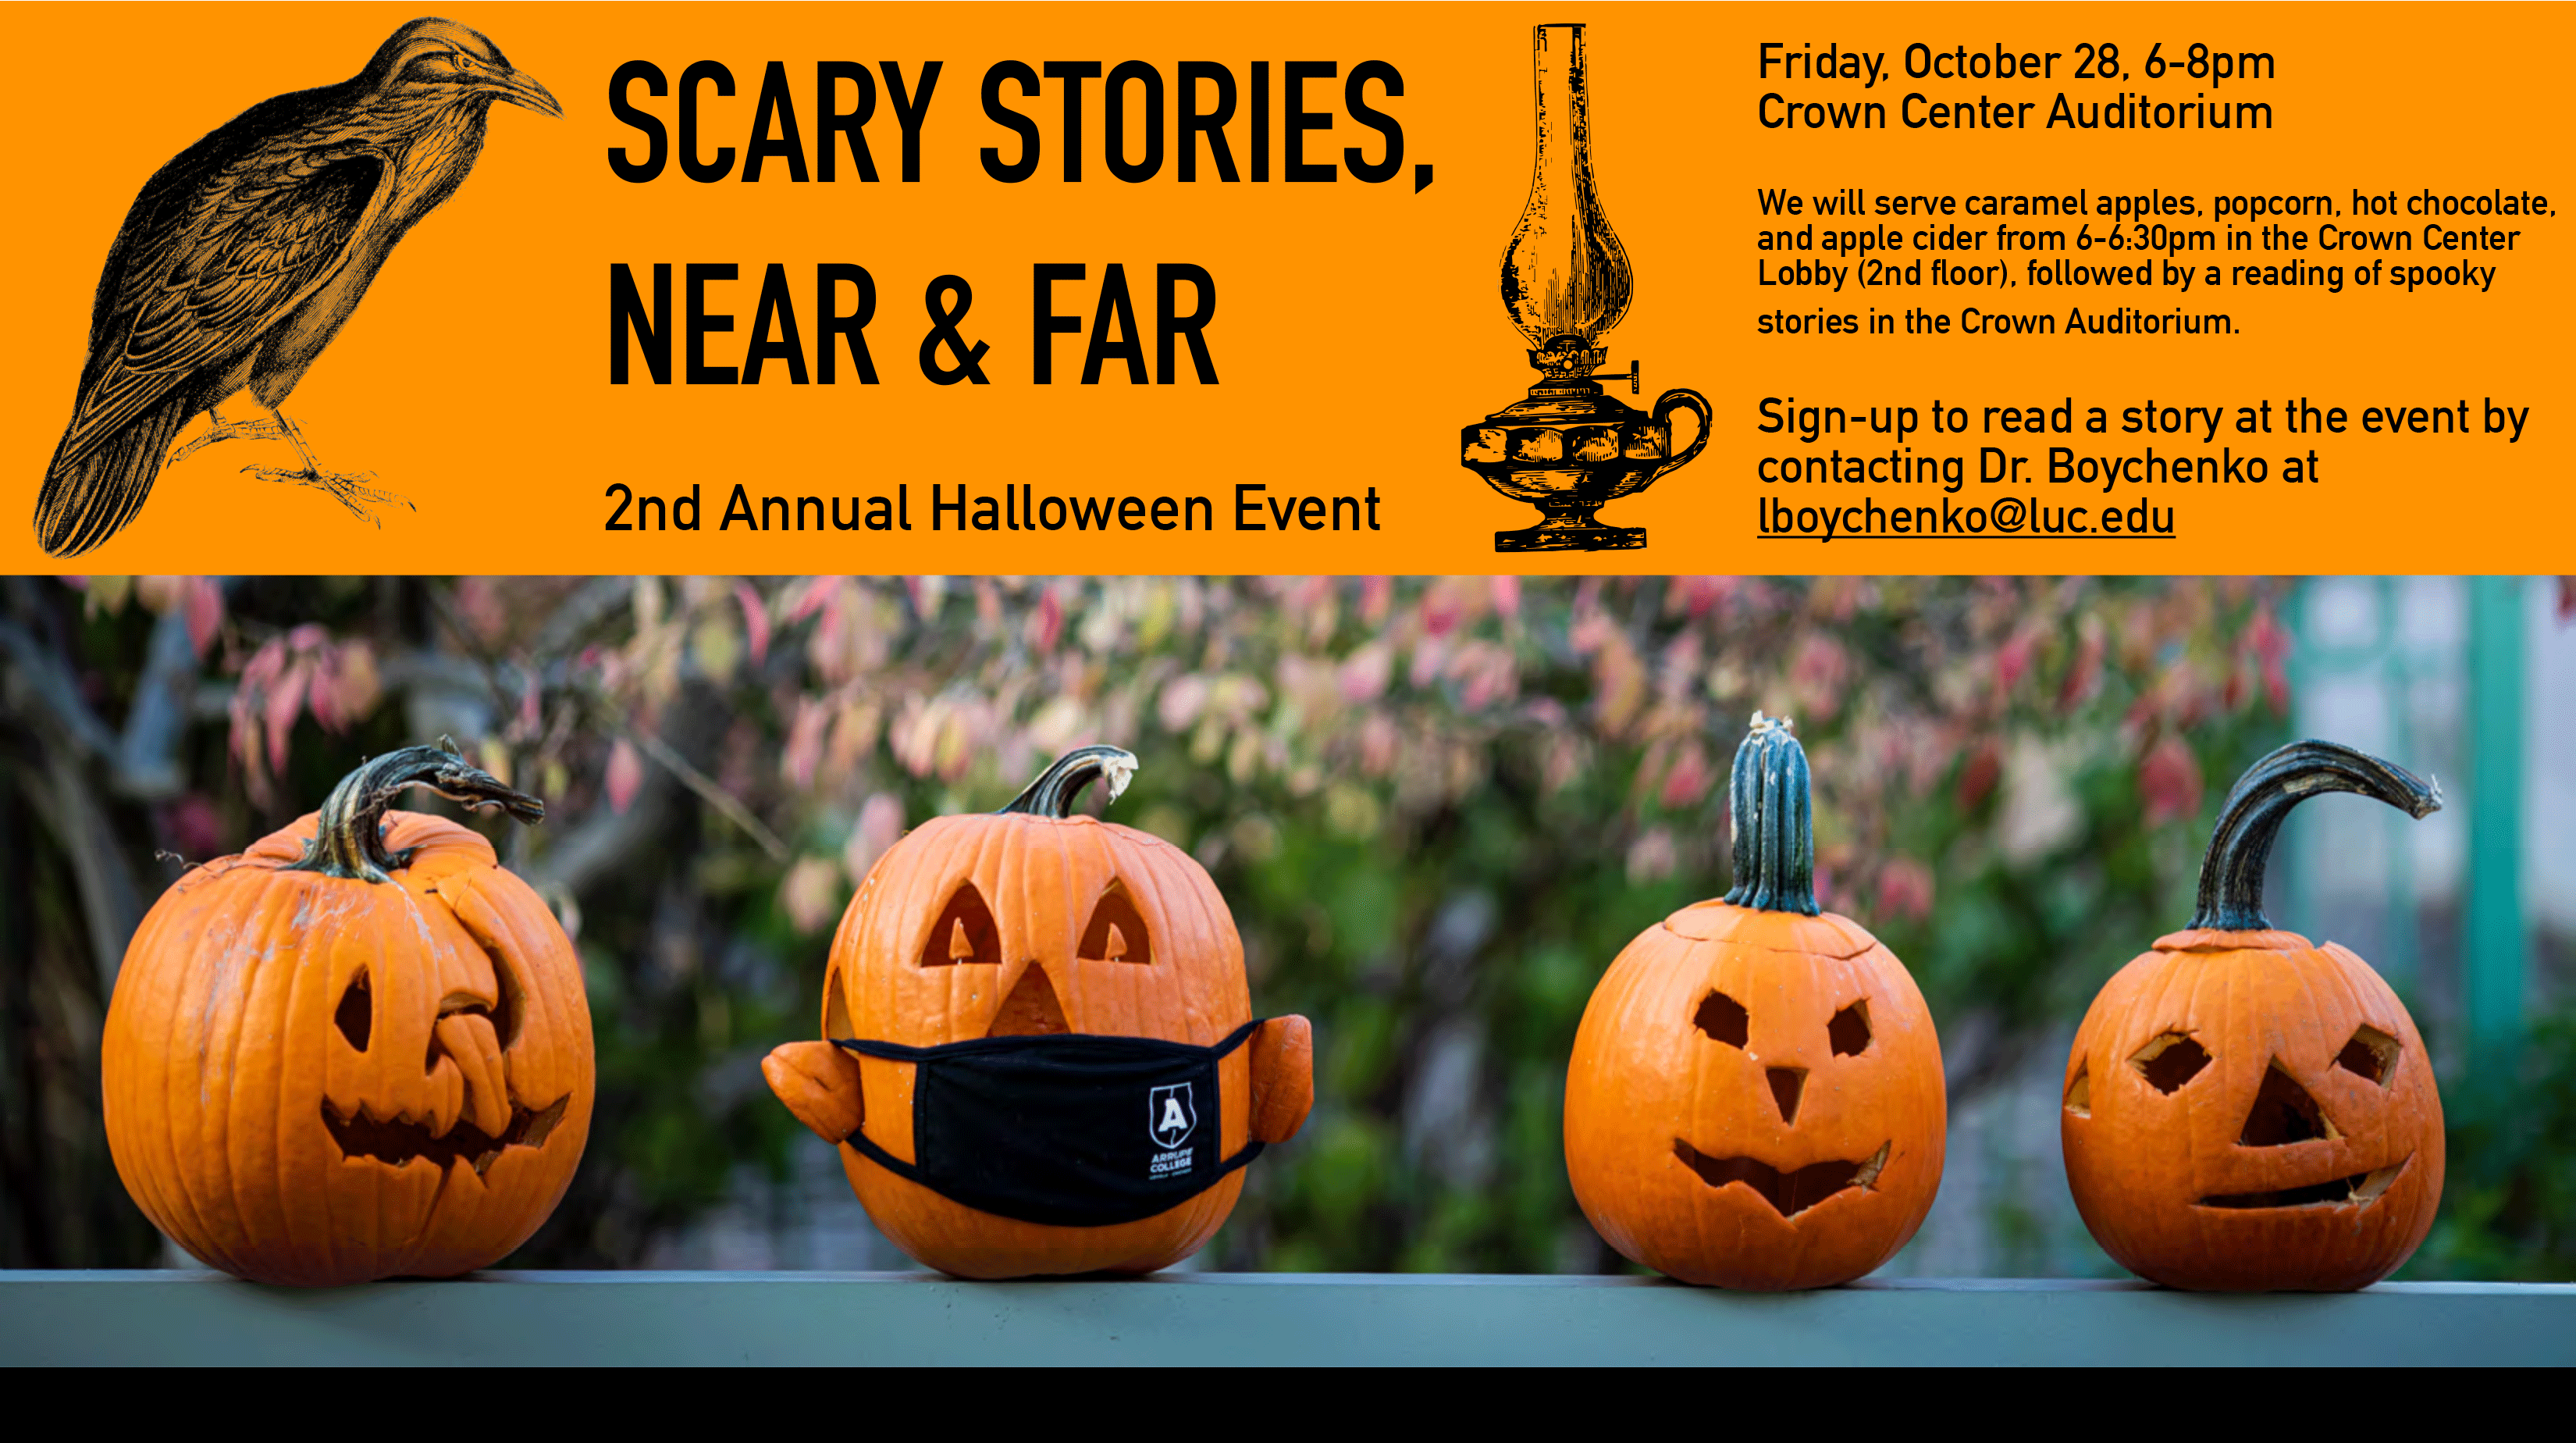 Celebrate the spooky season with Scary Stories, Near & Far!